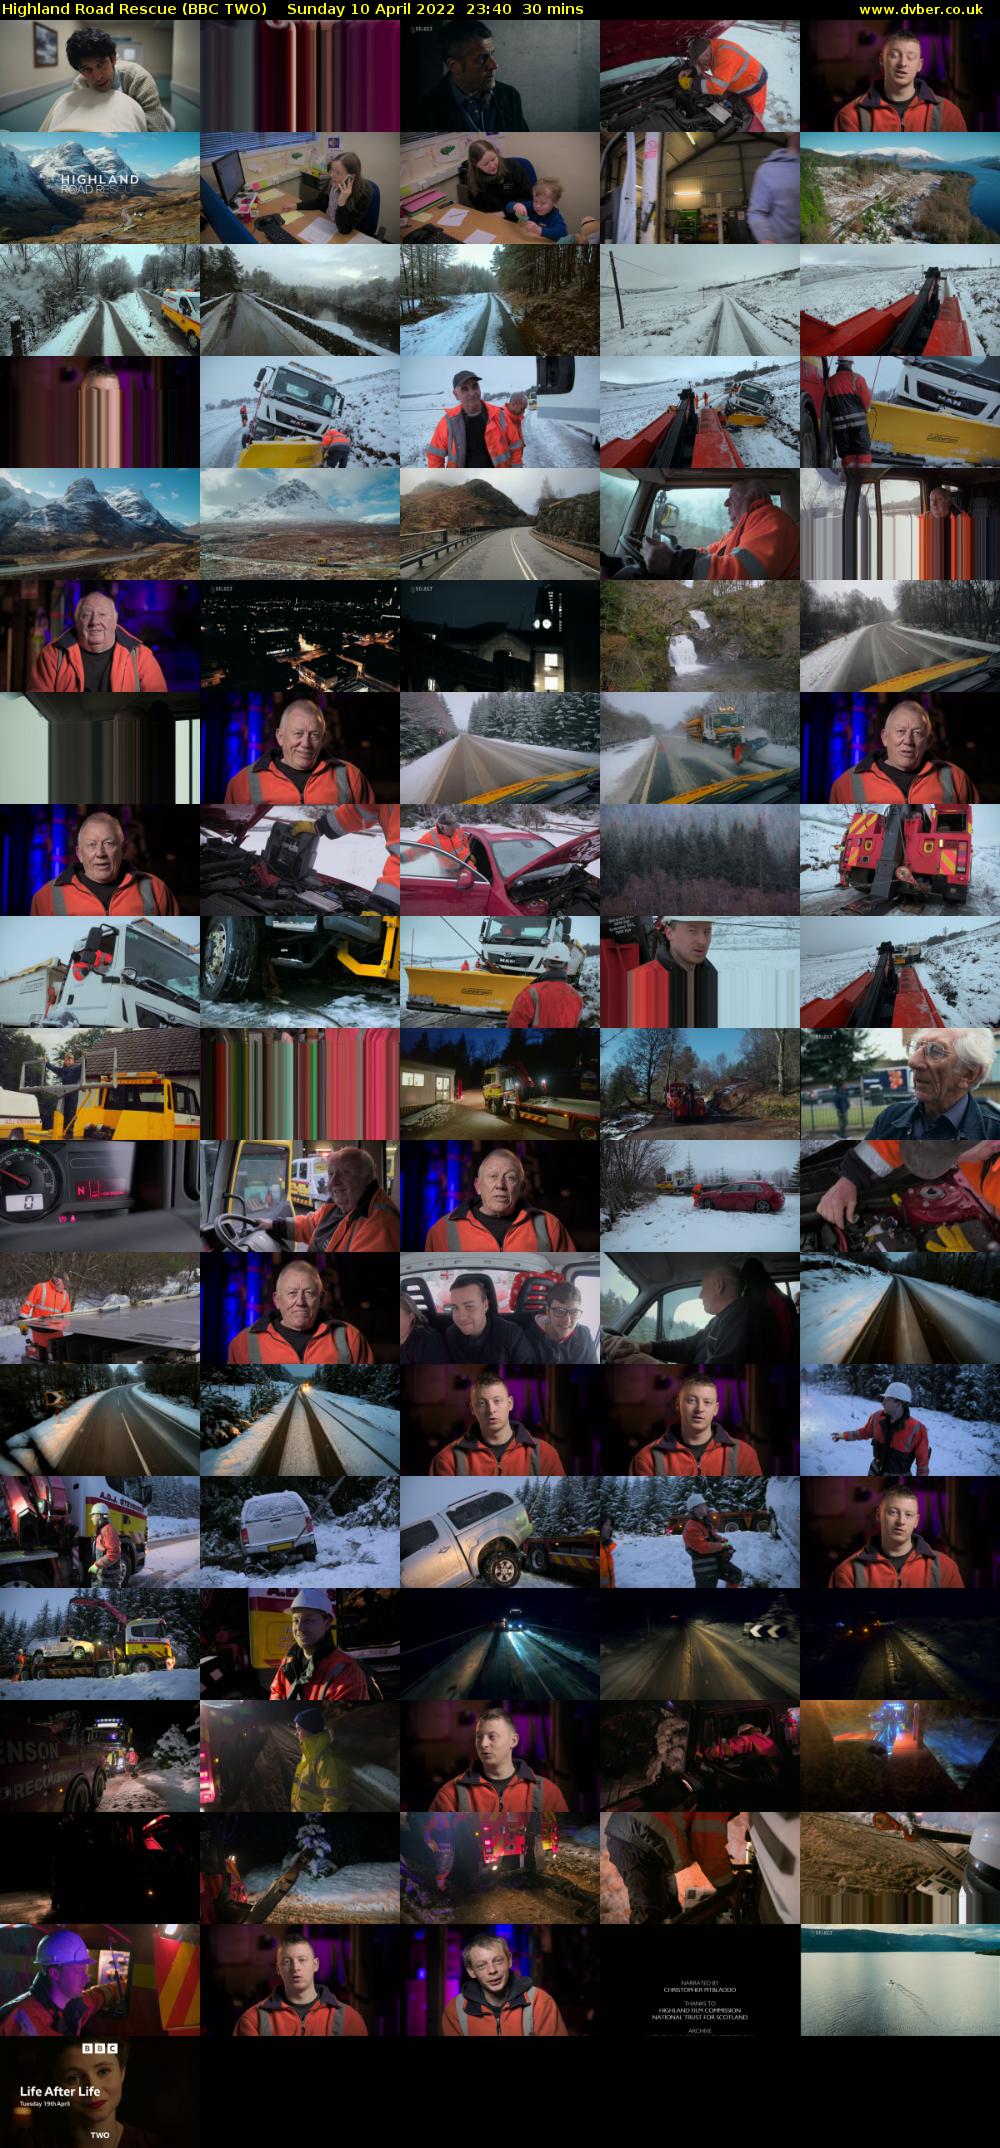 Highland Road Rescue (BBC TWO) Sunday 10 April 2022 23:40 - 00:10